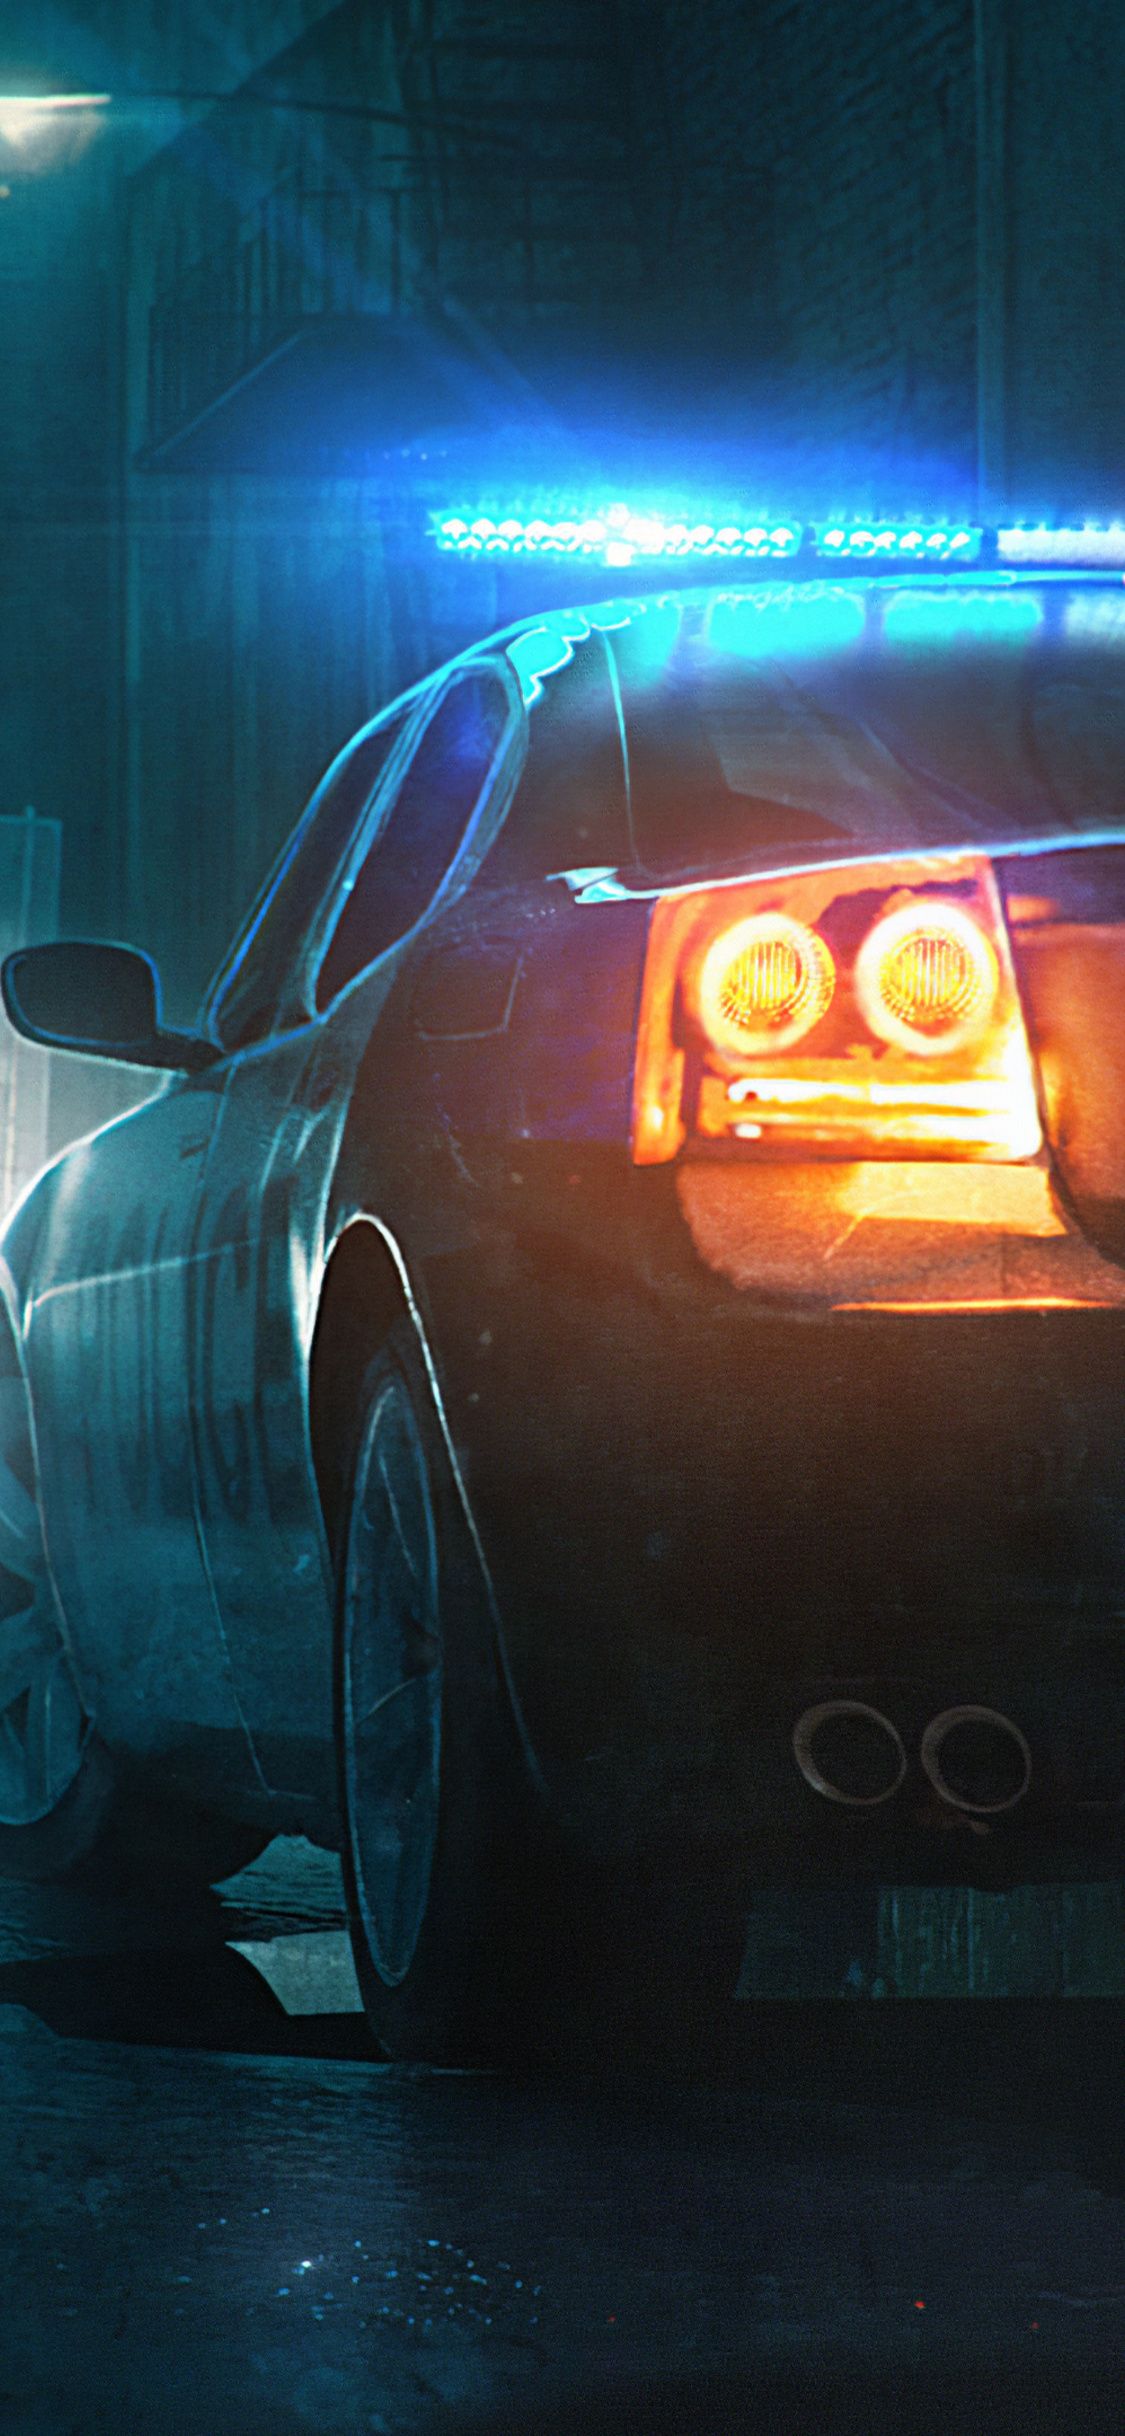 Police Patrol Car Digital Art 5k iPhone XS, iPhone iPhone X HD 4k Wallpaper, Image, Background, Photo and Picture